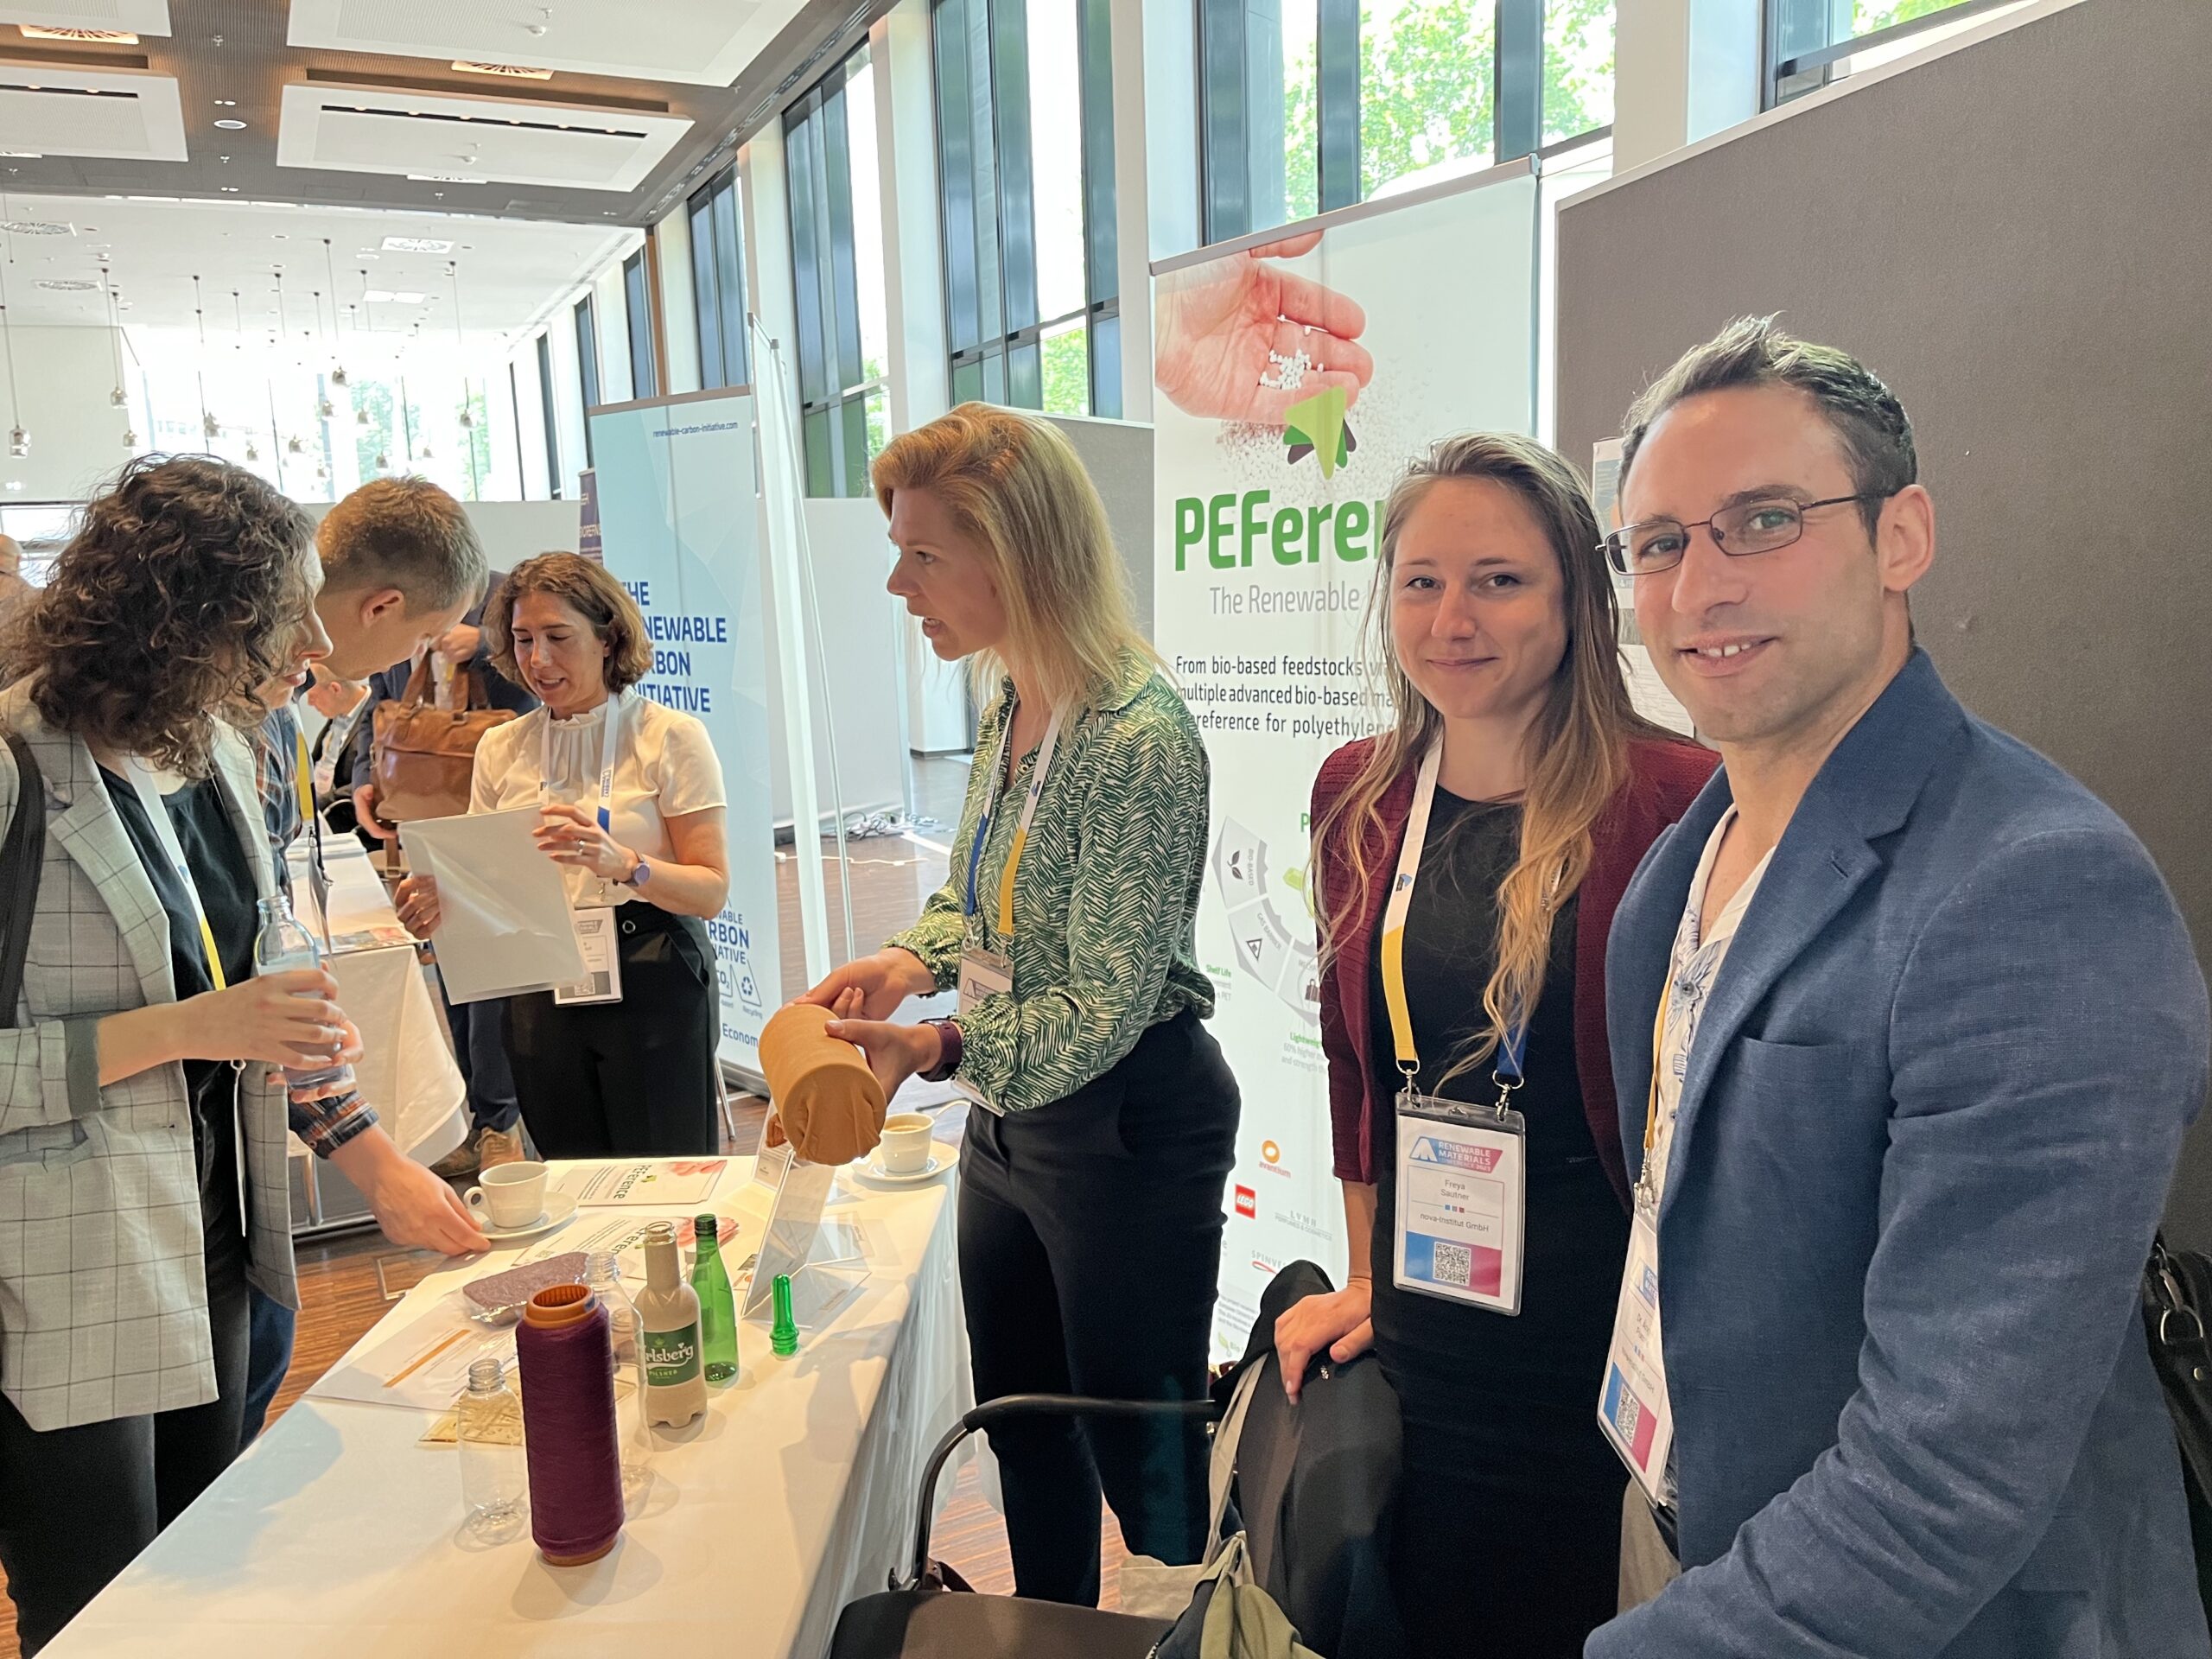 Busy PEFerence booth at the Renewable Materials Conference 2023, Ángel Puente, Freya Sautner, Ingrid Goumans and Sheila Khodadadi behind the booth explaining stuff to visitors